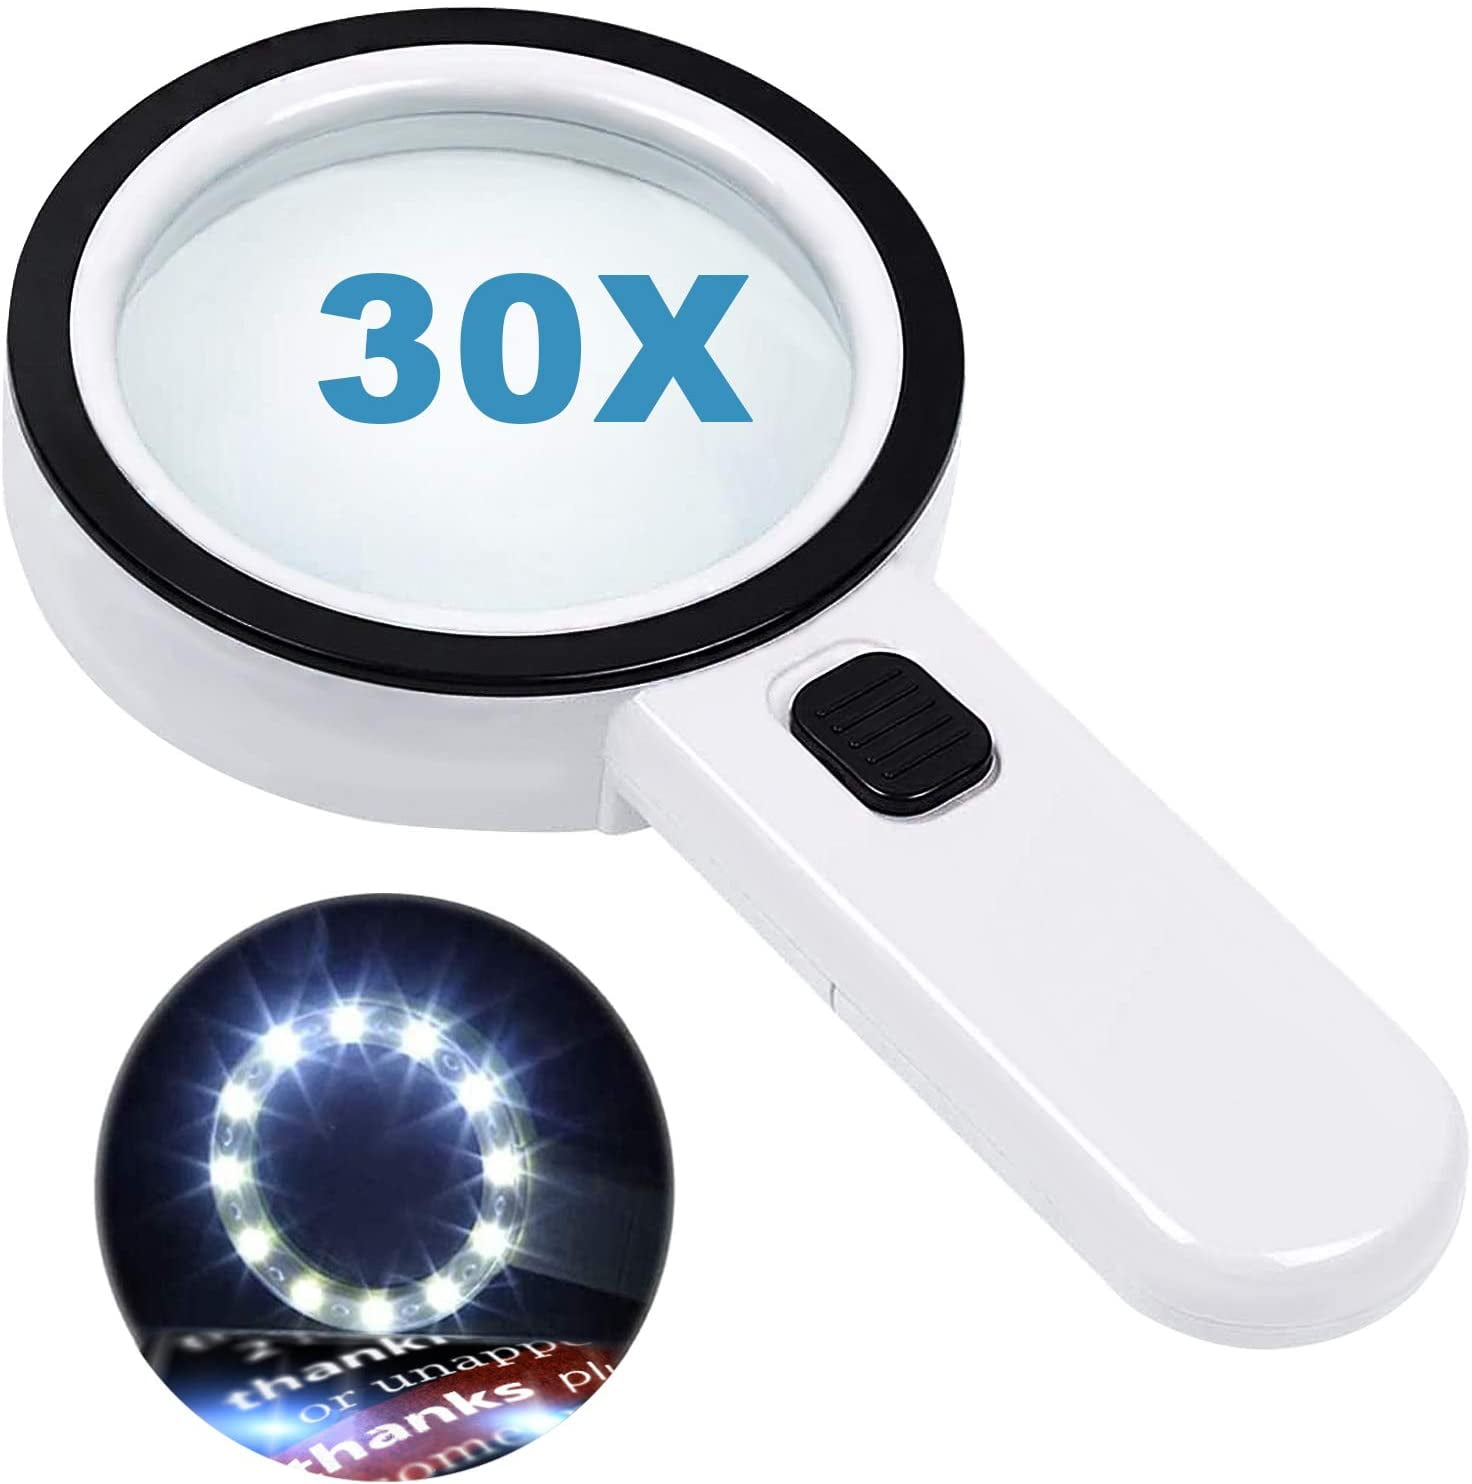 30X Handheld Magnifying Glass with Light Macular Degeneration Exploring Jewelry Coins Map Hobbies Inspection Stamps Jumbo Double Lens 12 LED Illuminated Magnifier for Seniors Reading 